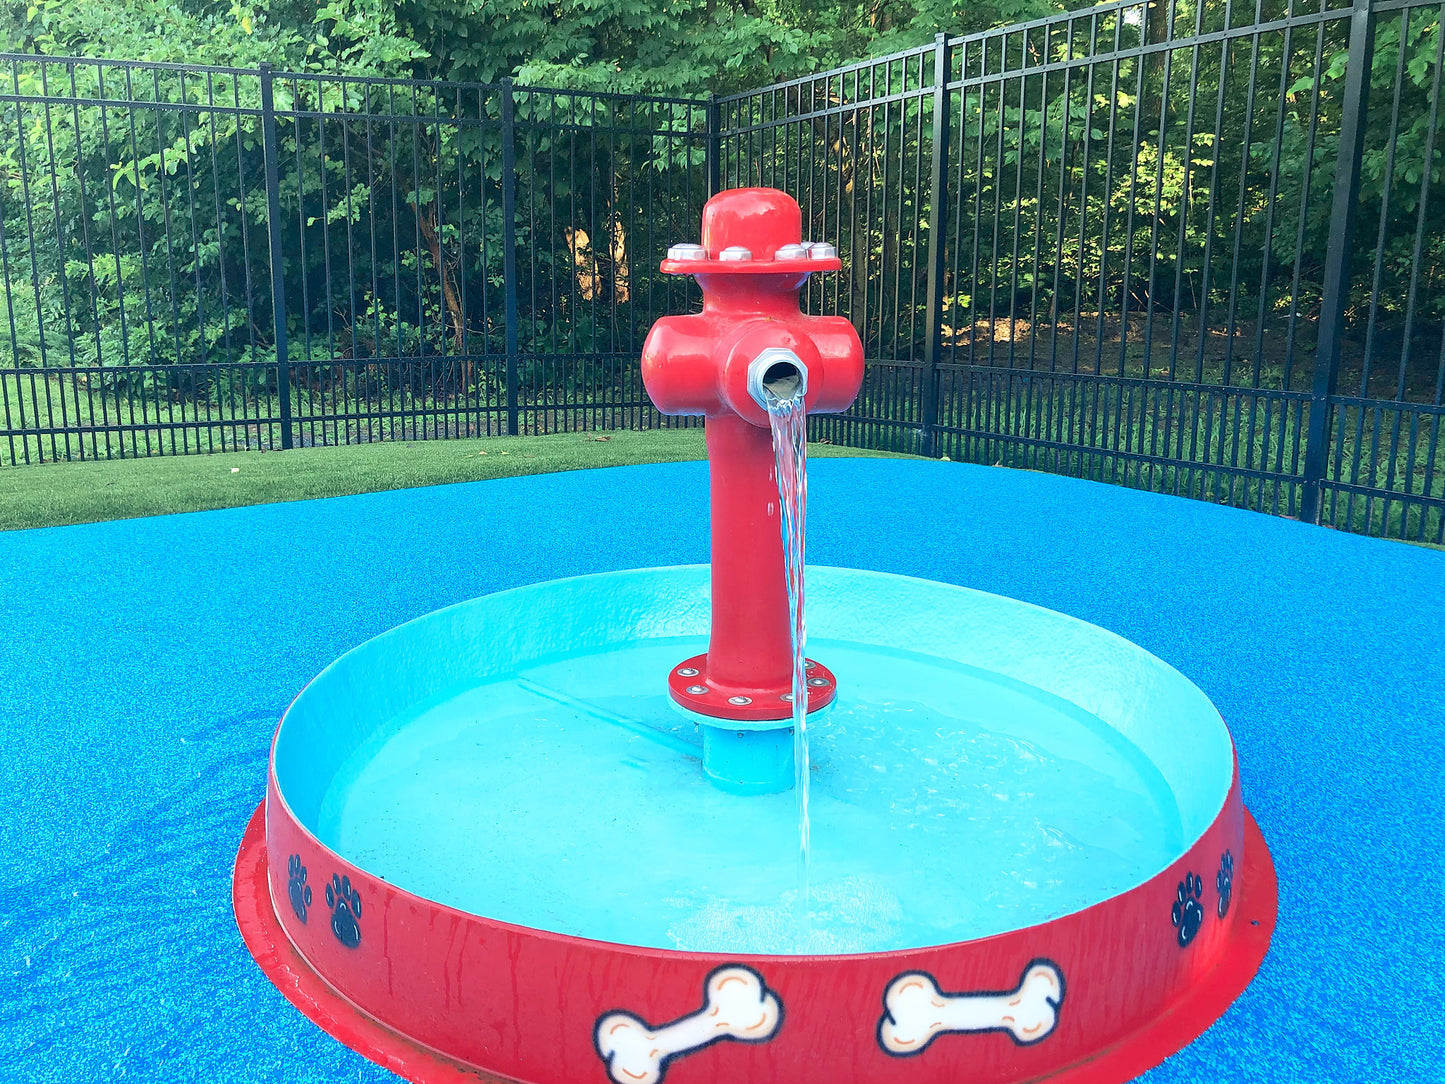 dog-bowl-with-hydrant-water-play-feature-made-in-the-usa-by-my-splash-pad-dog-water-park